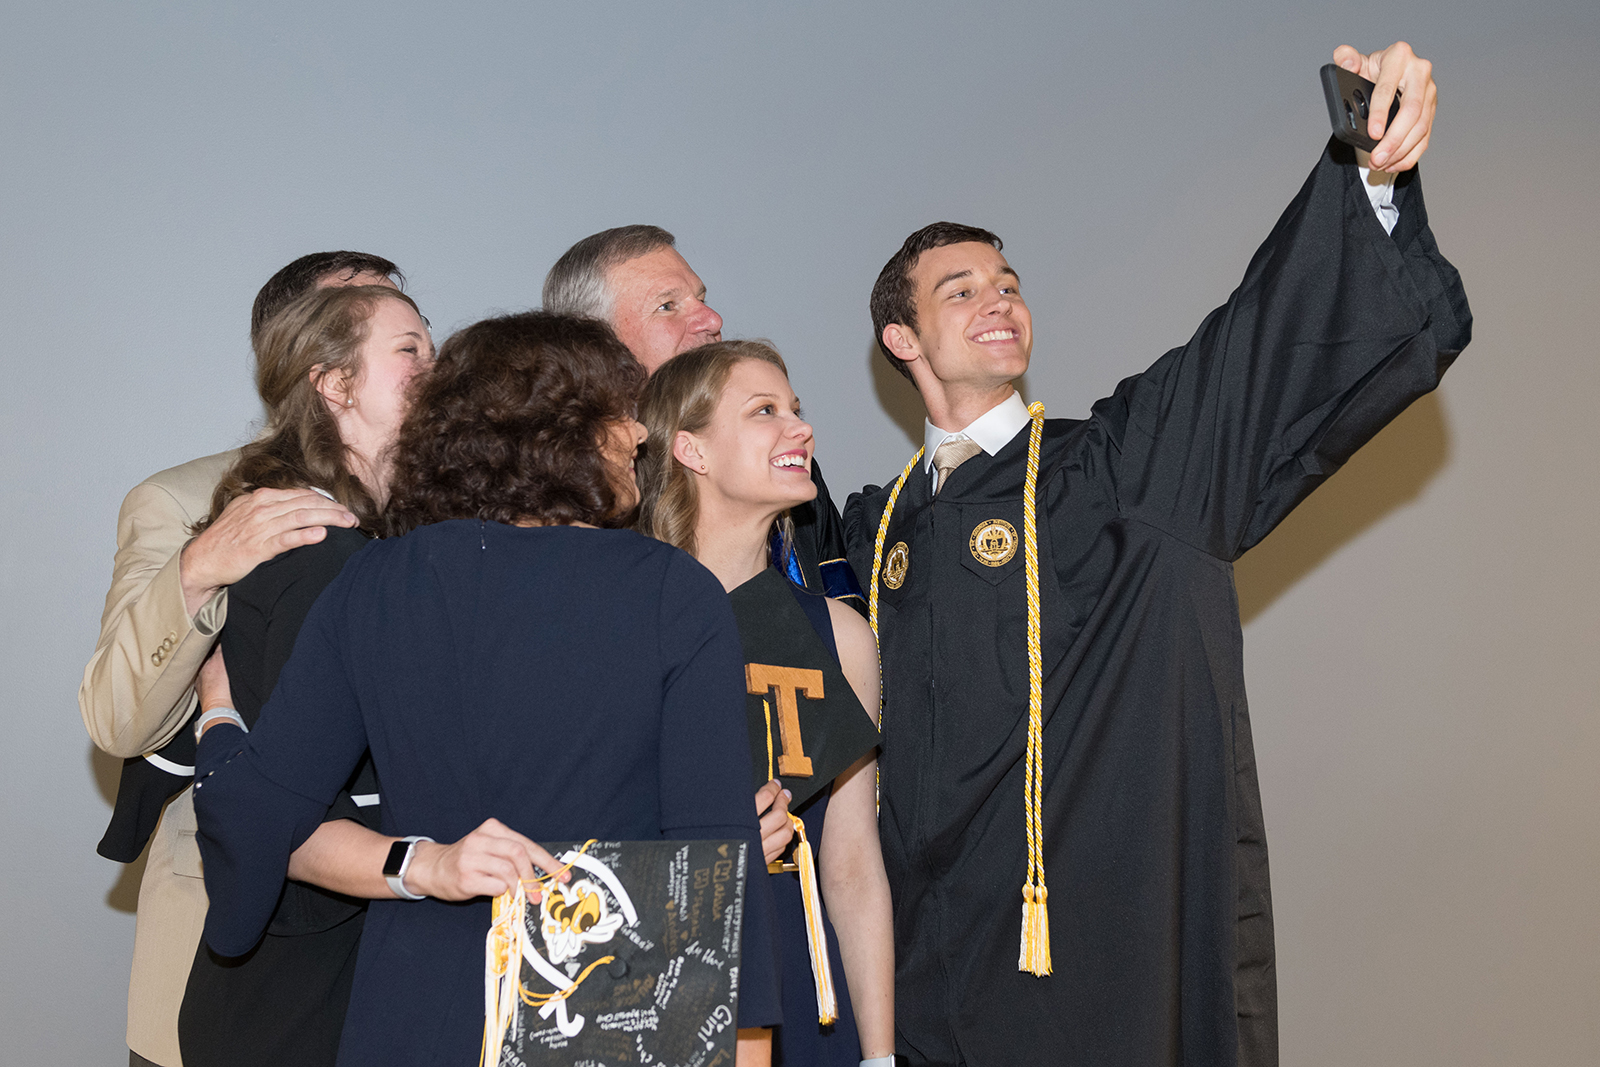 Family selfie at Commencement. 